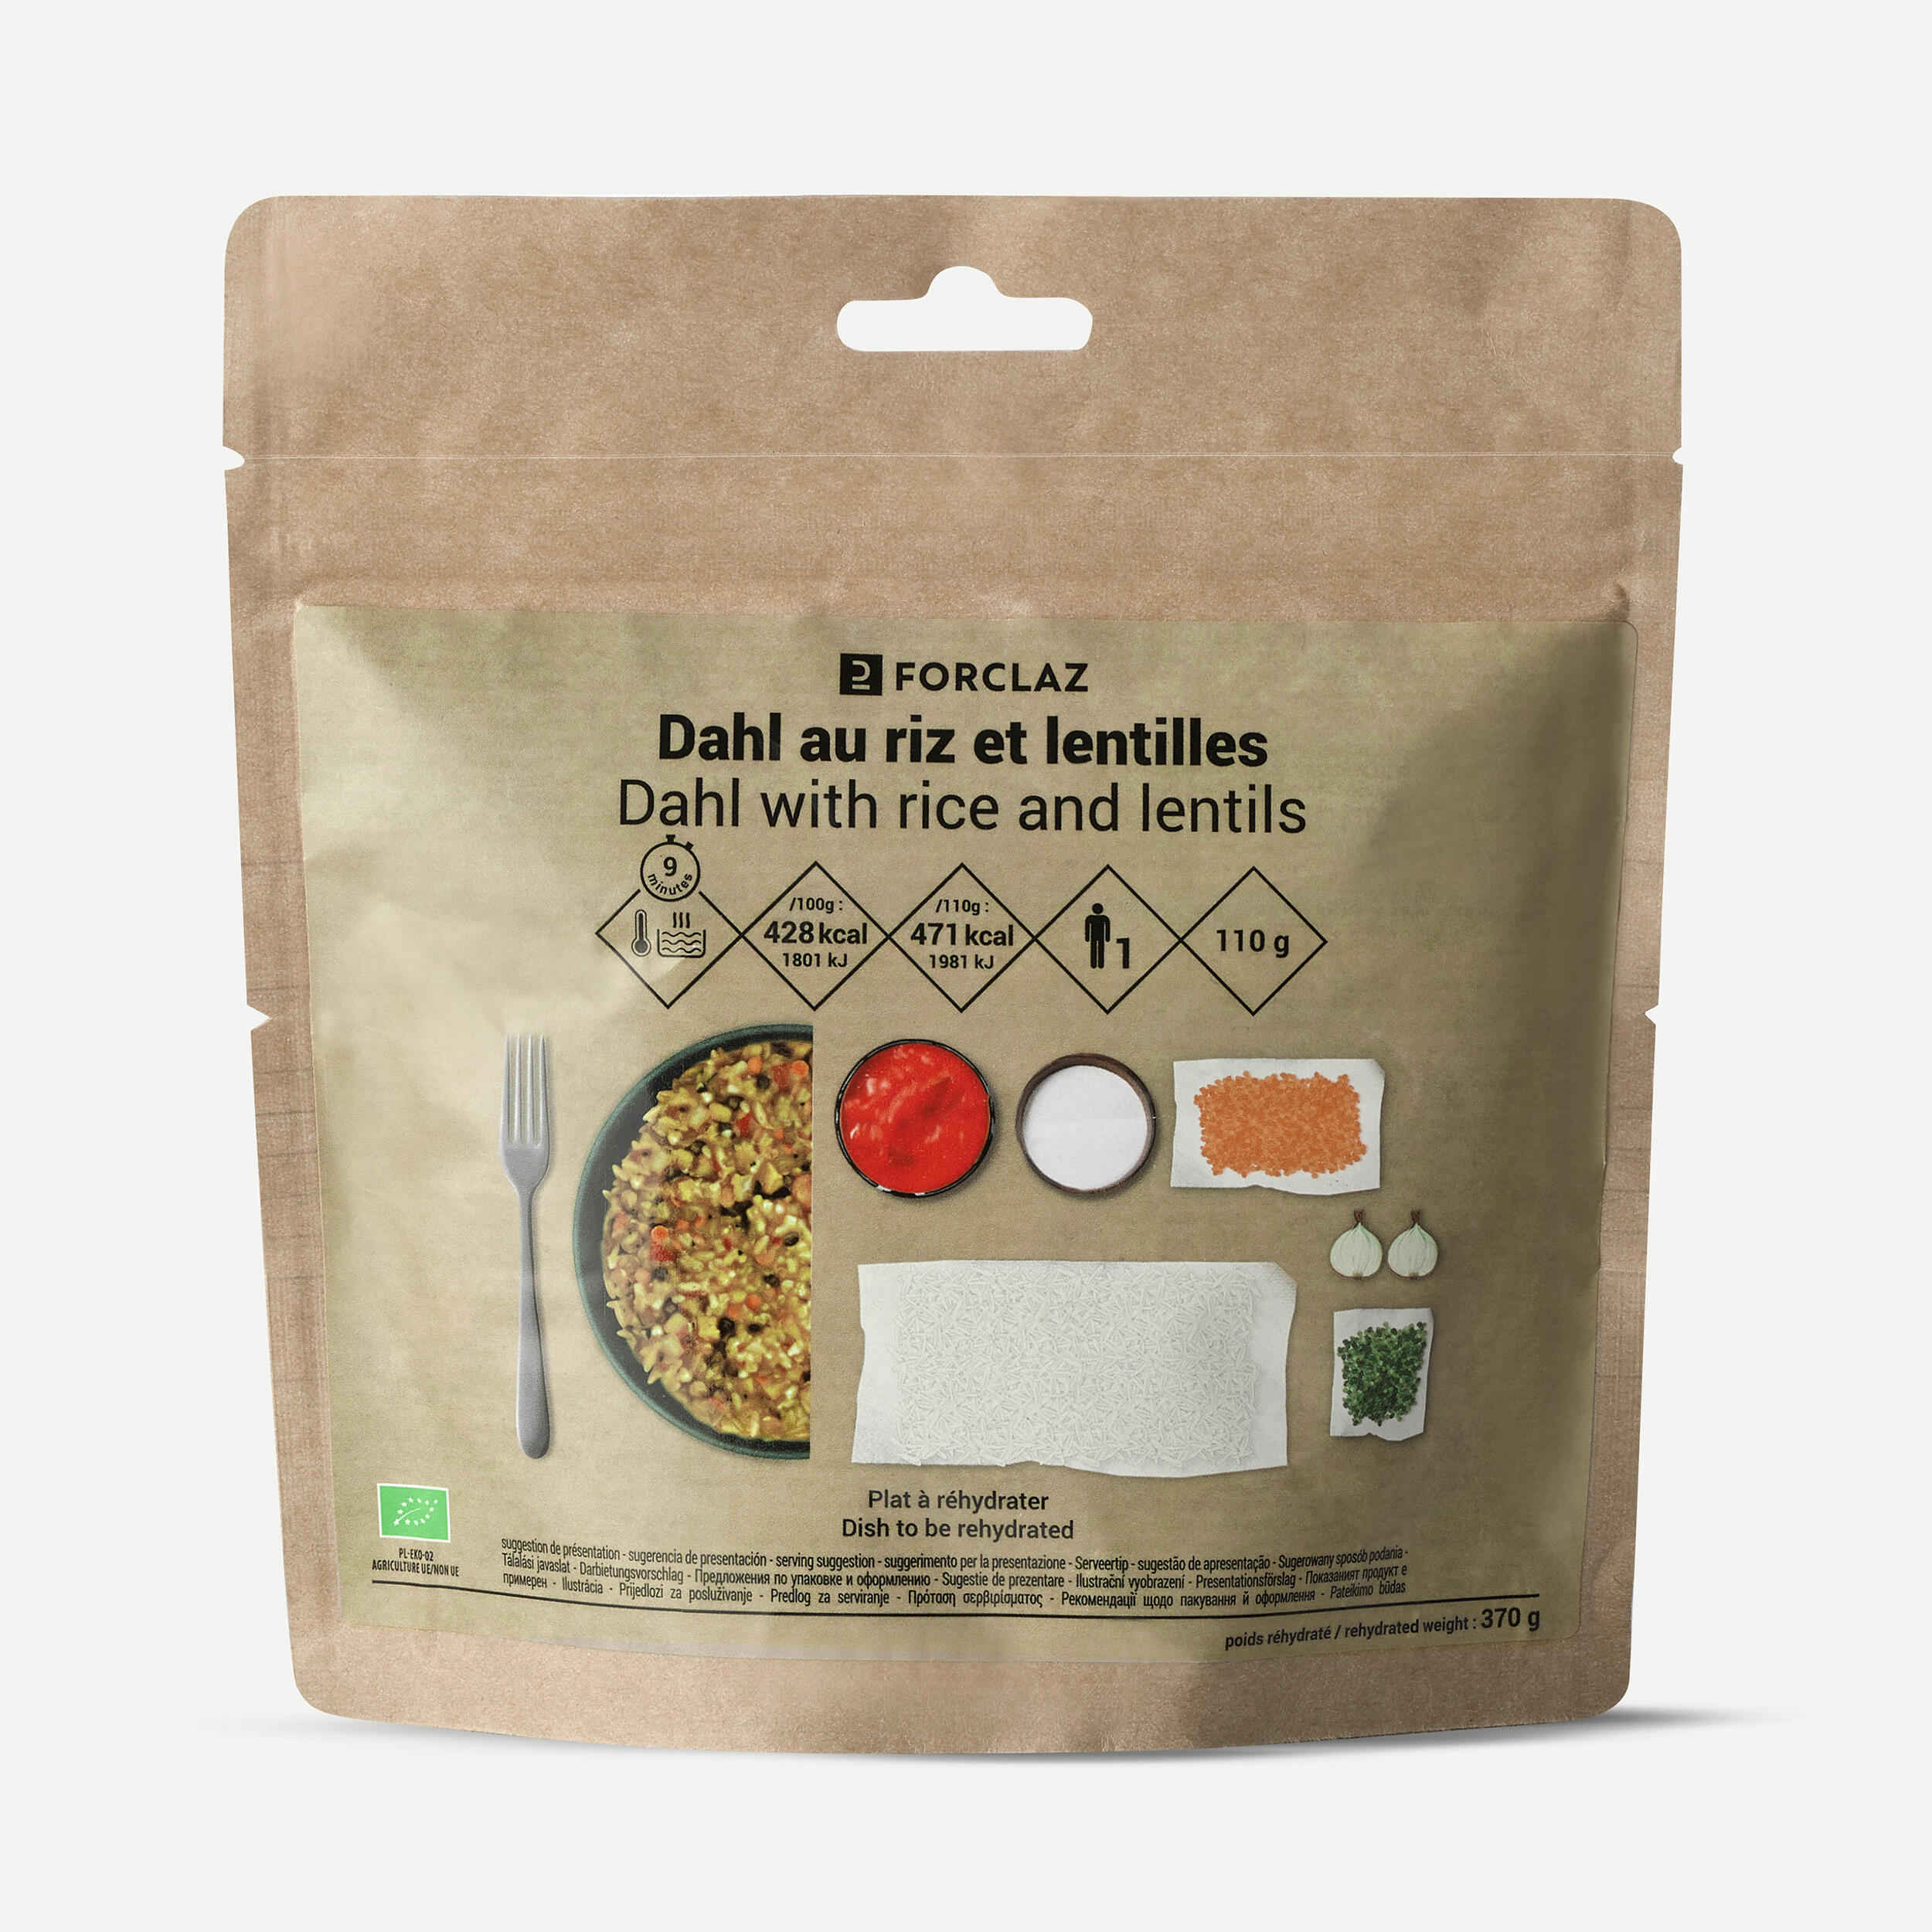 Freeze-dried vegetarian and meal - Dhal with rice and lentils - 110 g 1/3